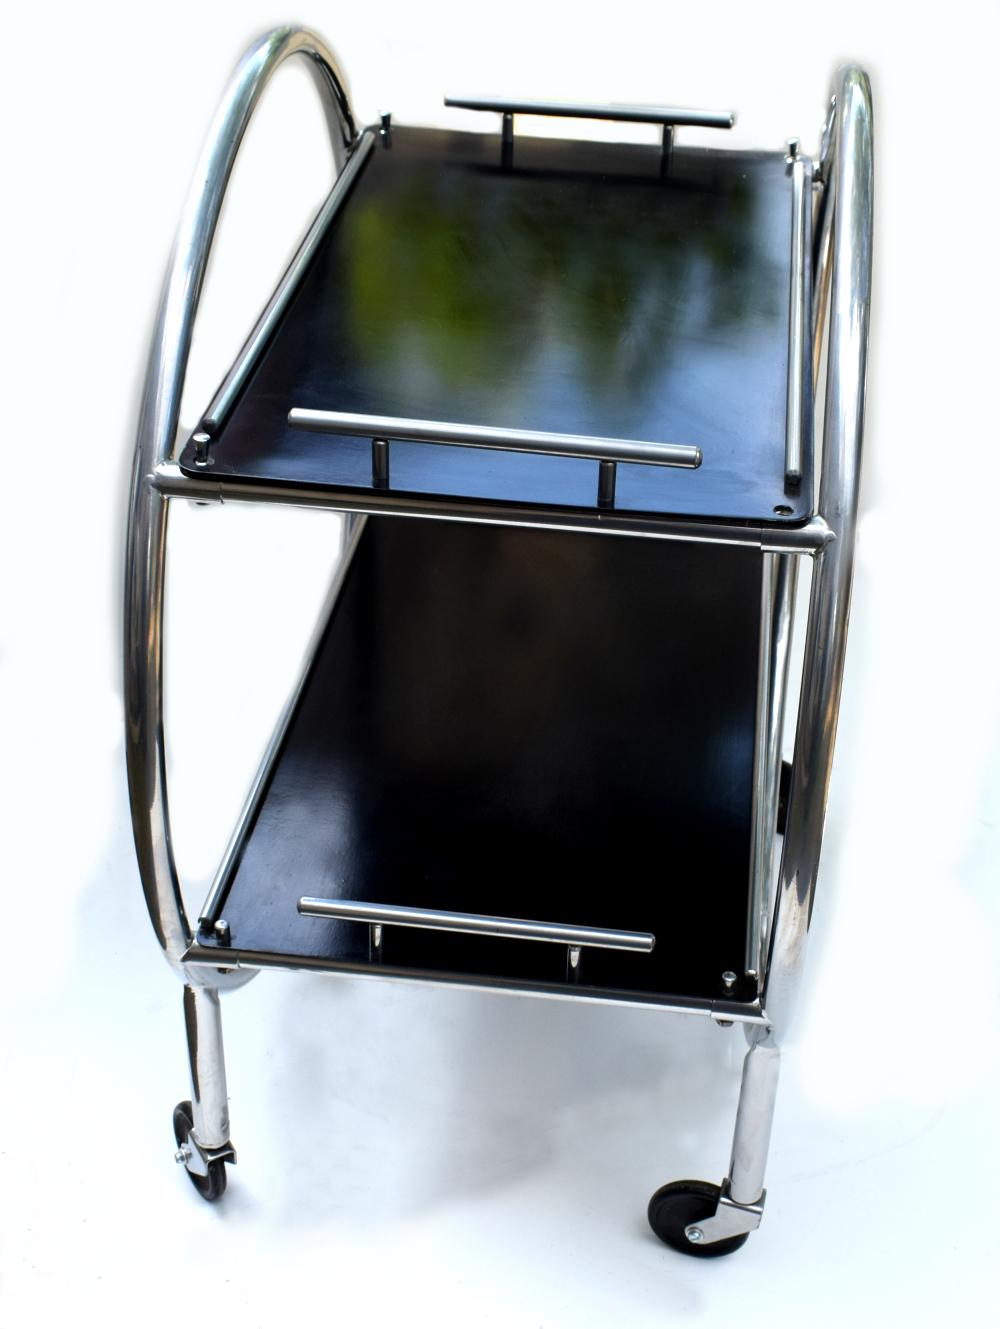 Stylish English 1930s Art Deco two-tier chrome and black laminate drinks Hostess trolley bar cart. If glam is your thing then this is for you! In situ these carts look nothing less than amazing. Can be used for serving drinks or just displaying your